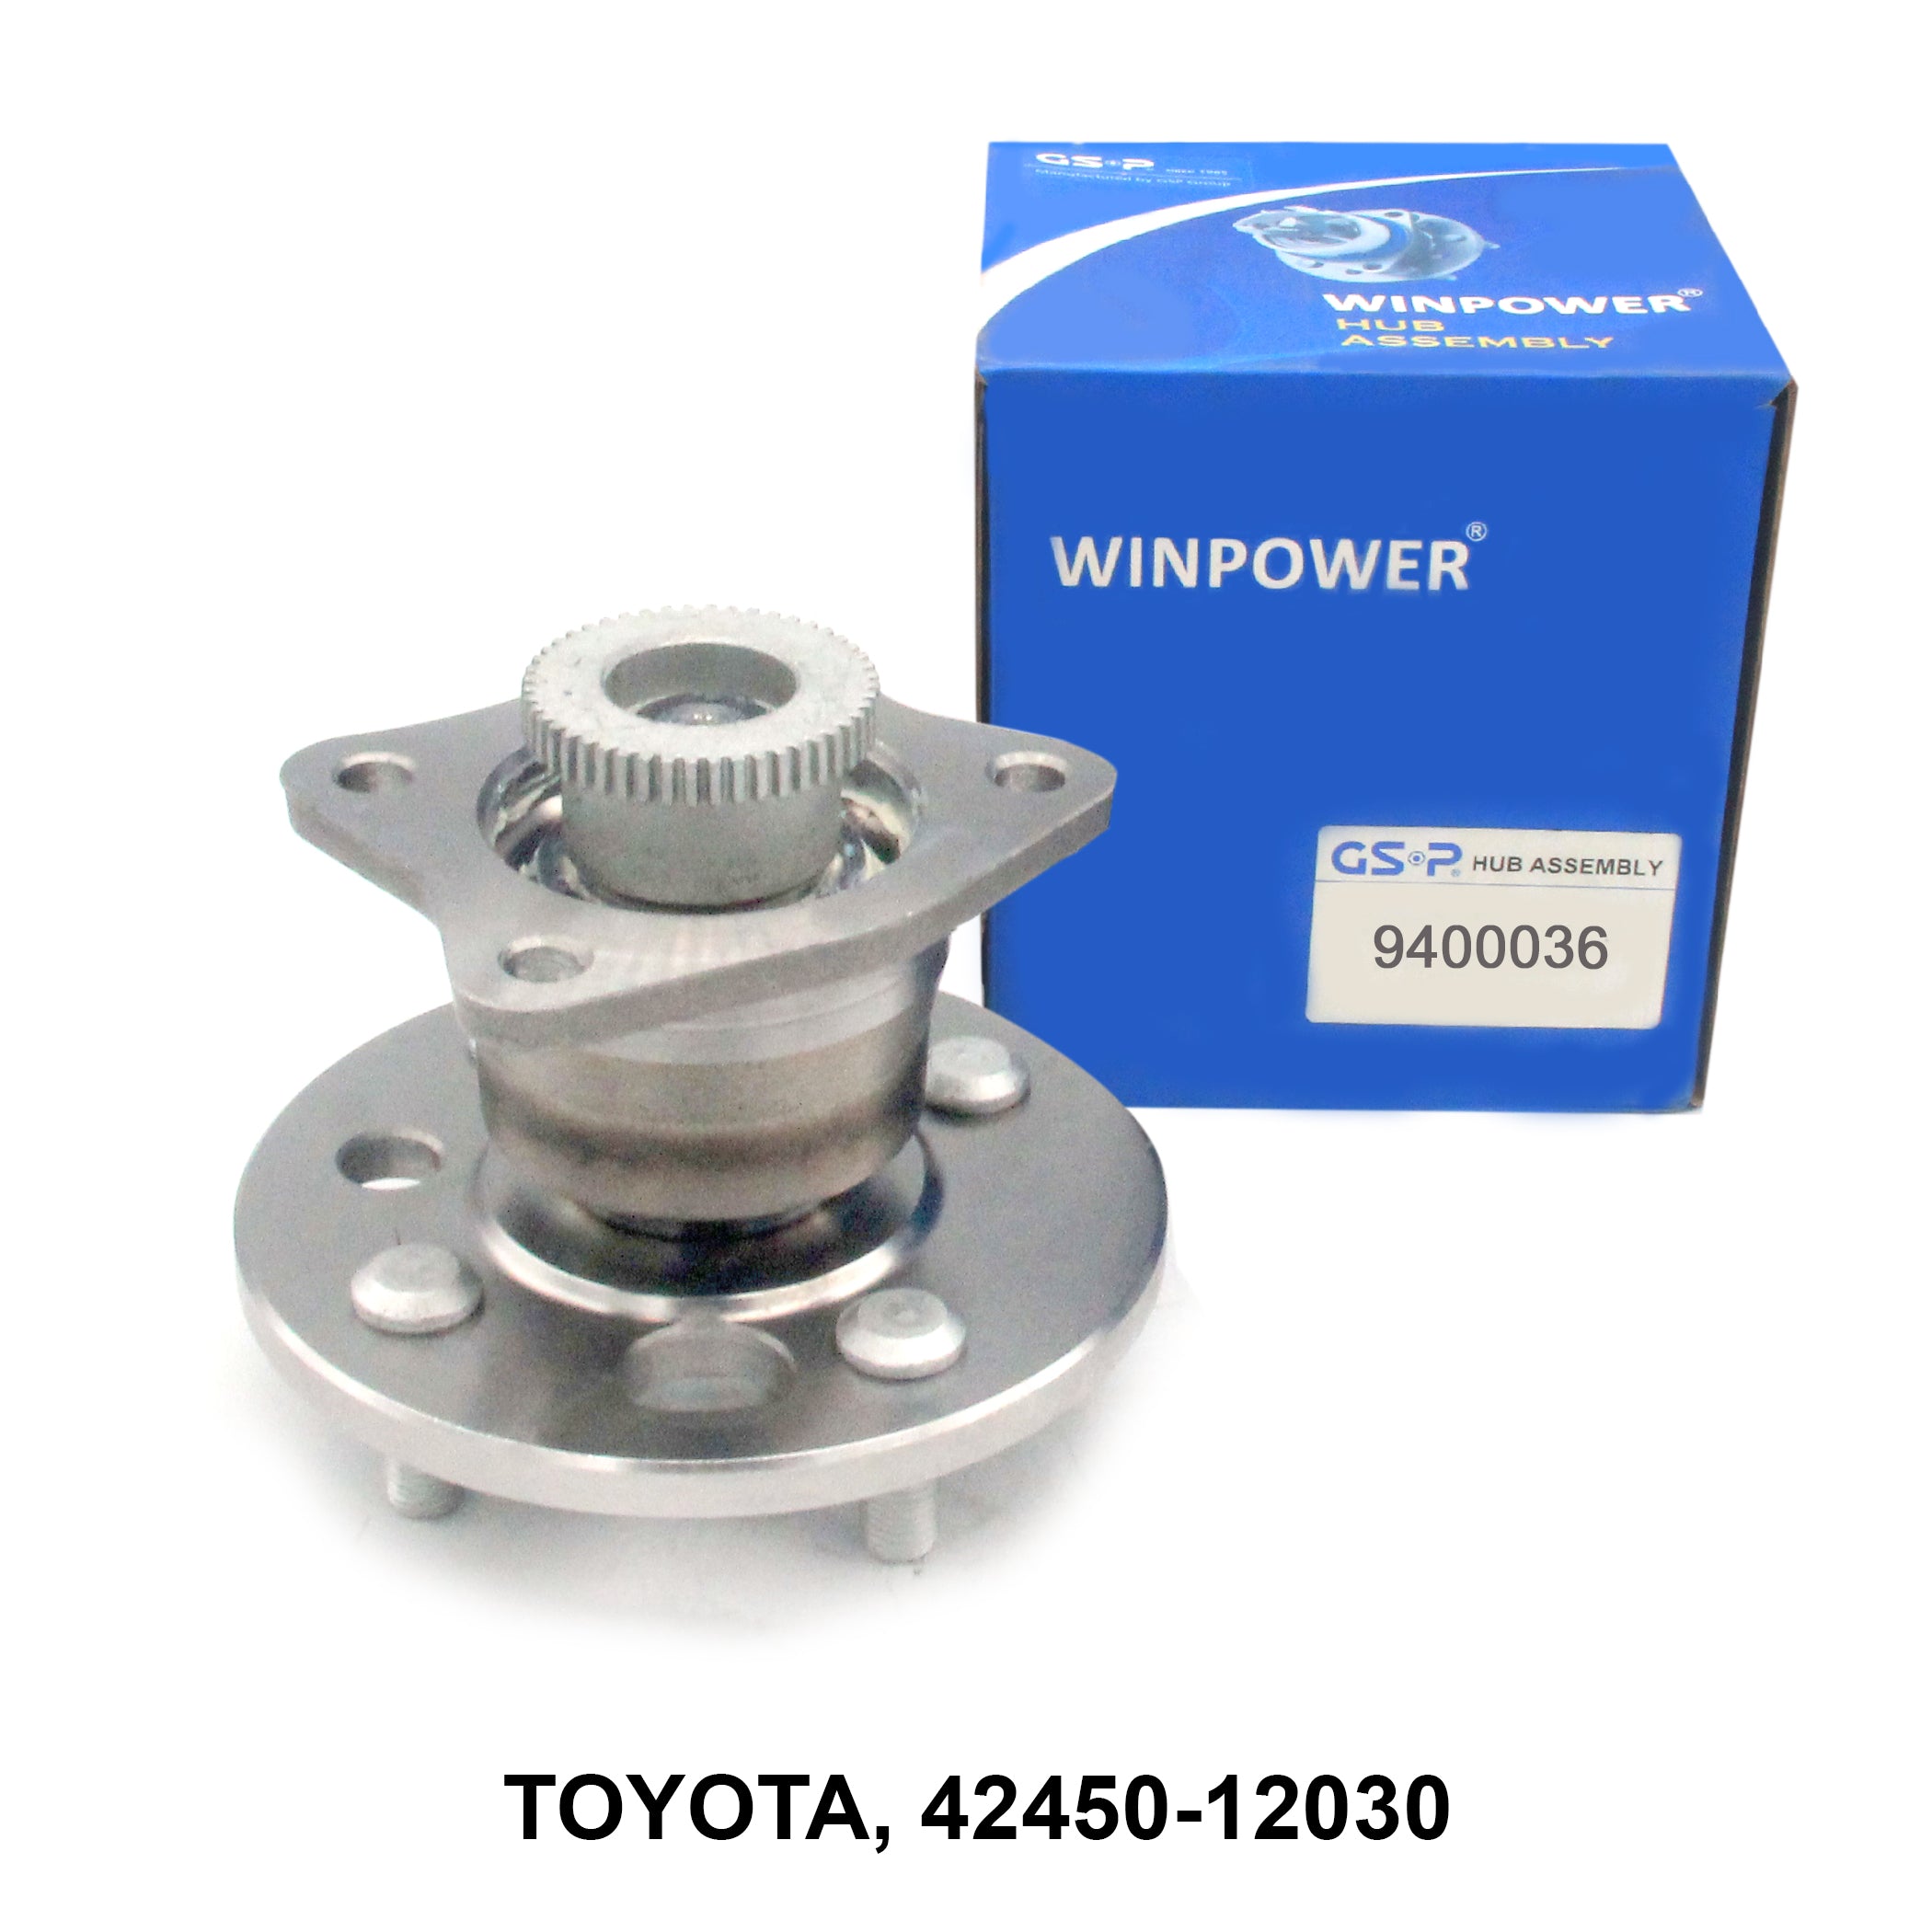 Hub Assembly၊ GSP+WINPOWER၊ 42450-12030၊ 9400036 (005193)